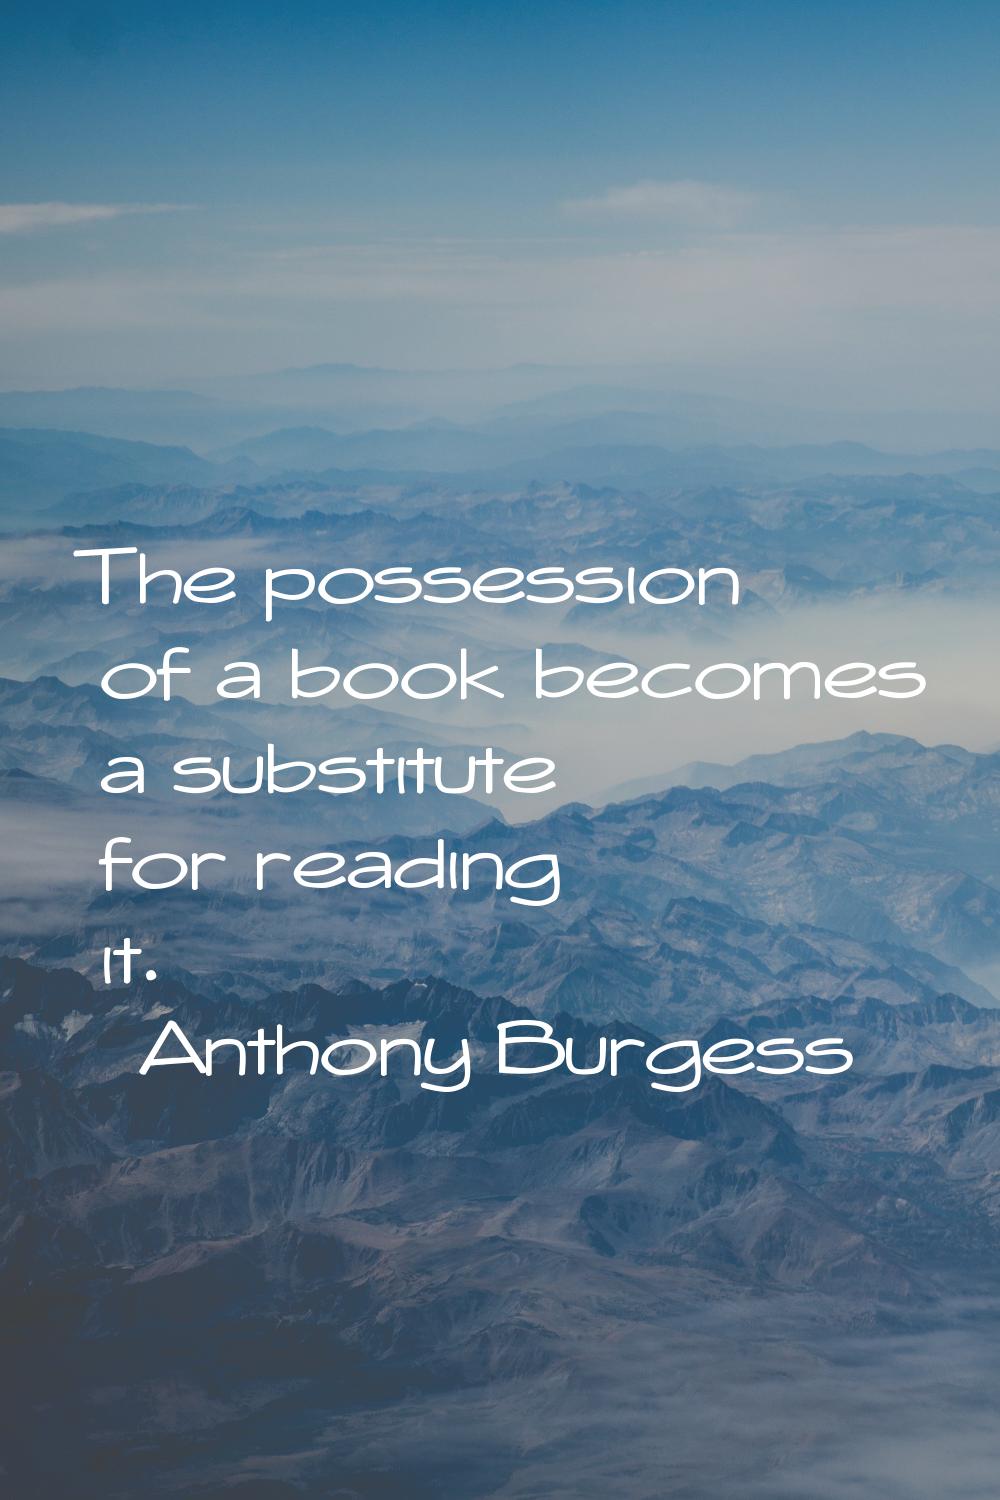 The possession of a book becomes a substitute for reading it.